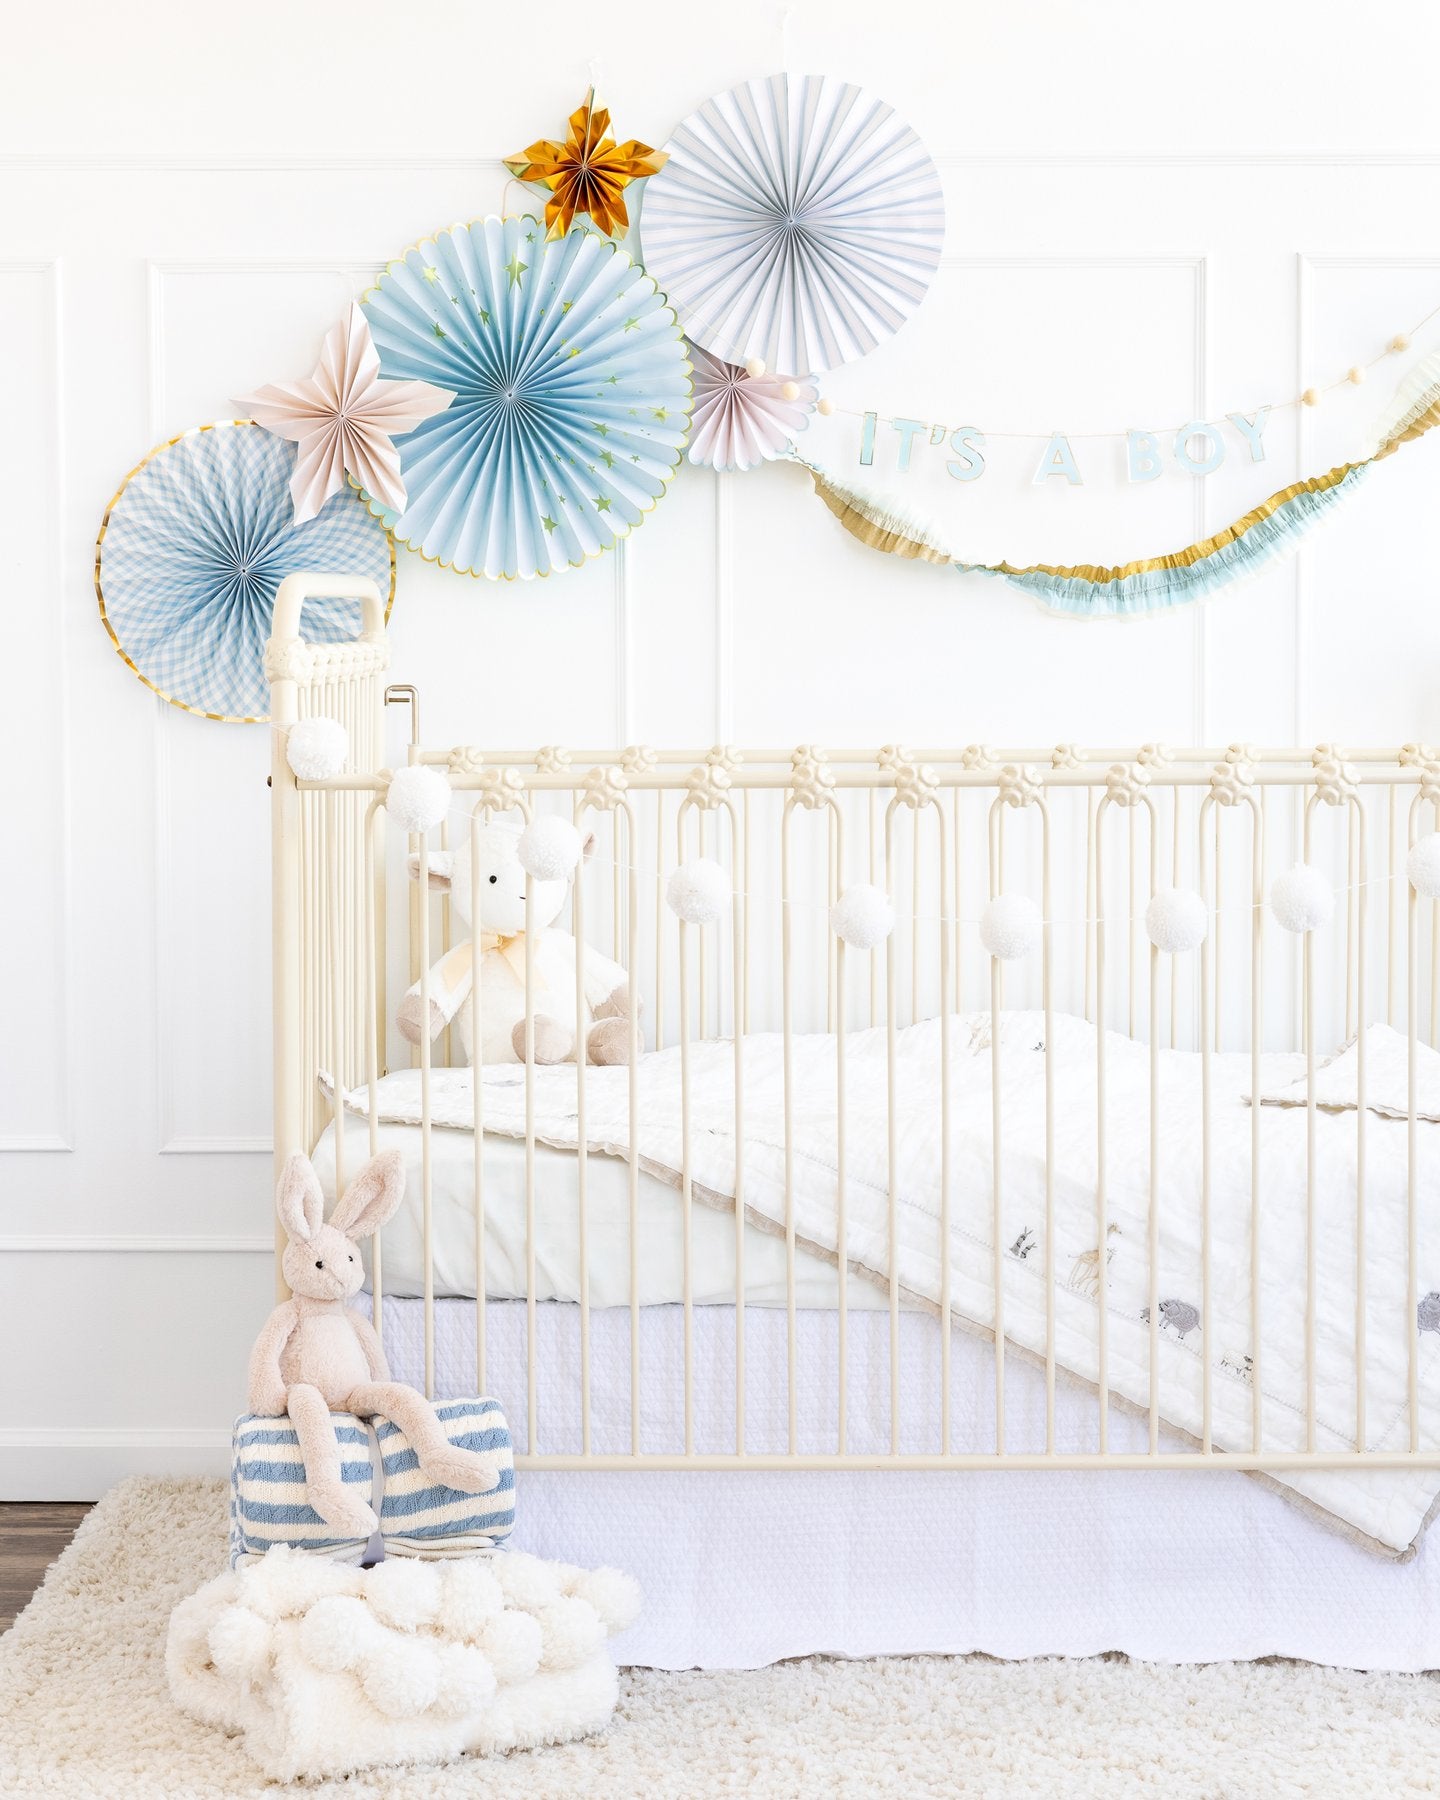 My Mind's Eye Cream/Blue/Gold Crepe Paper Banner hanging over a white baby cot with baby blue fans